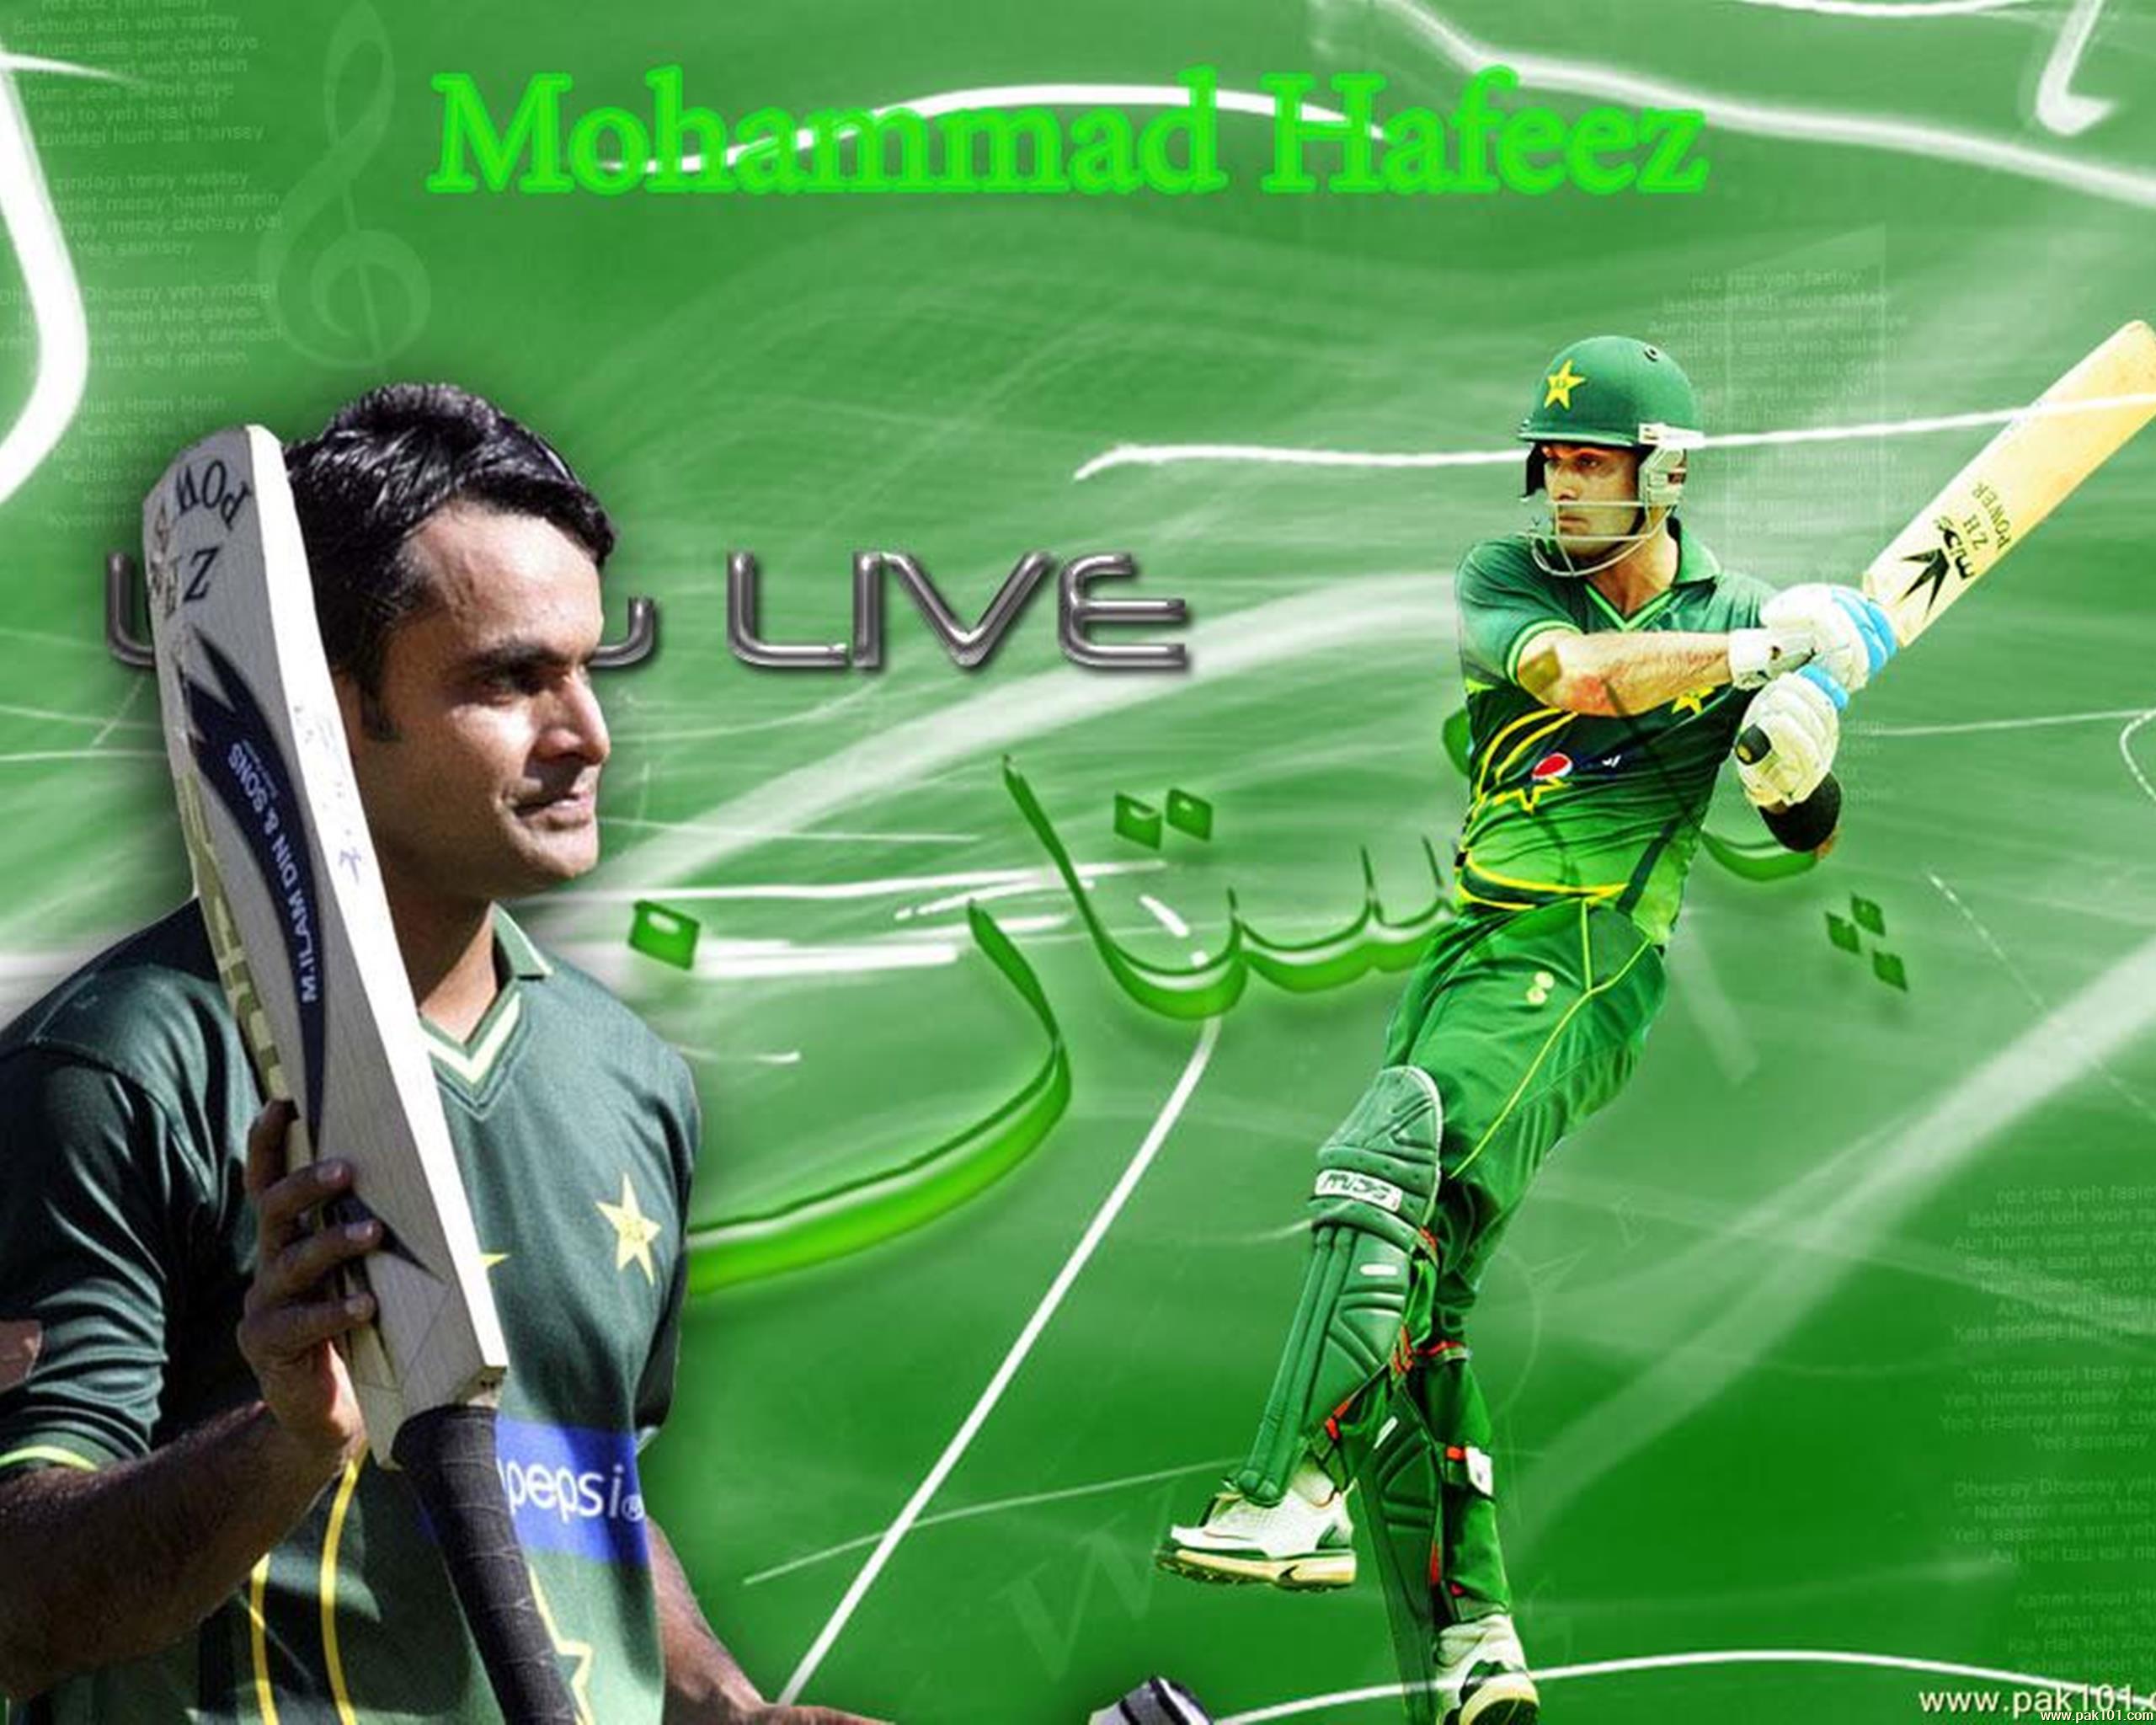 Wallpaper > Cricketers > Mohammad Hafeez > Mohammad Hafeez high quality! Free download 1024x768